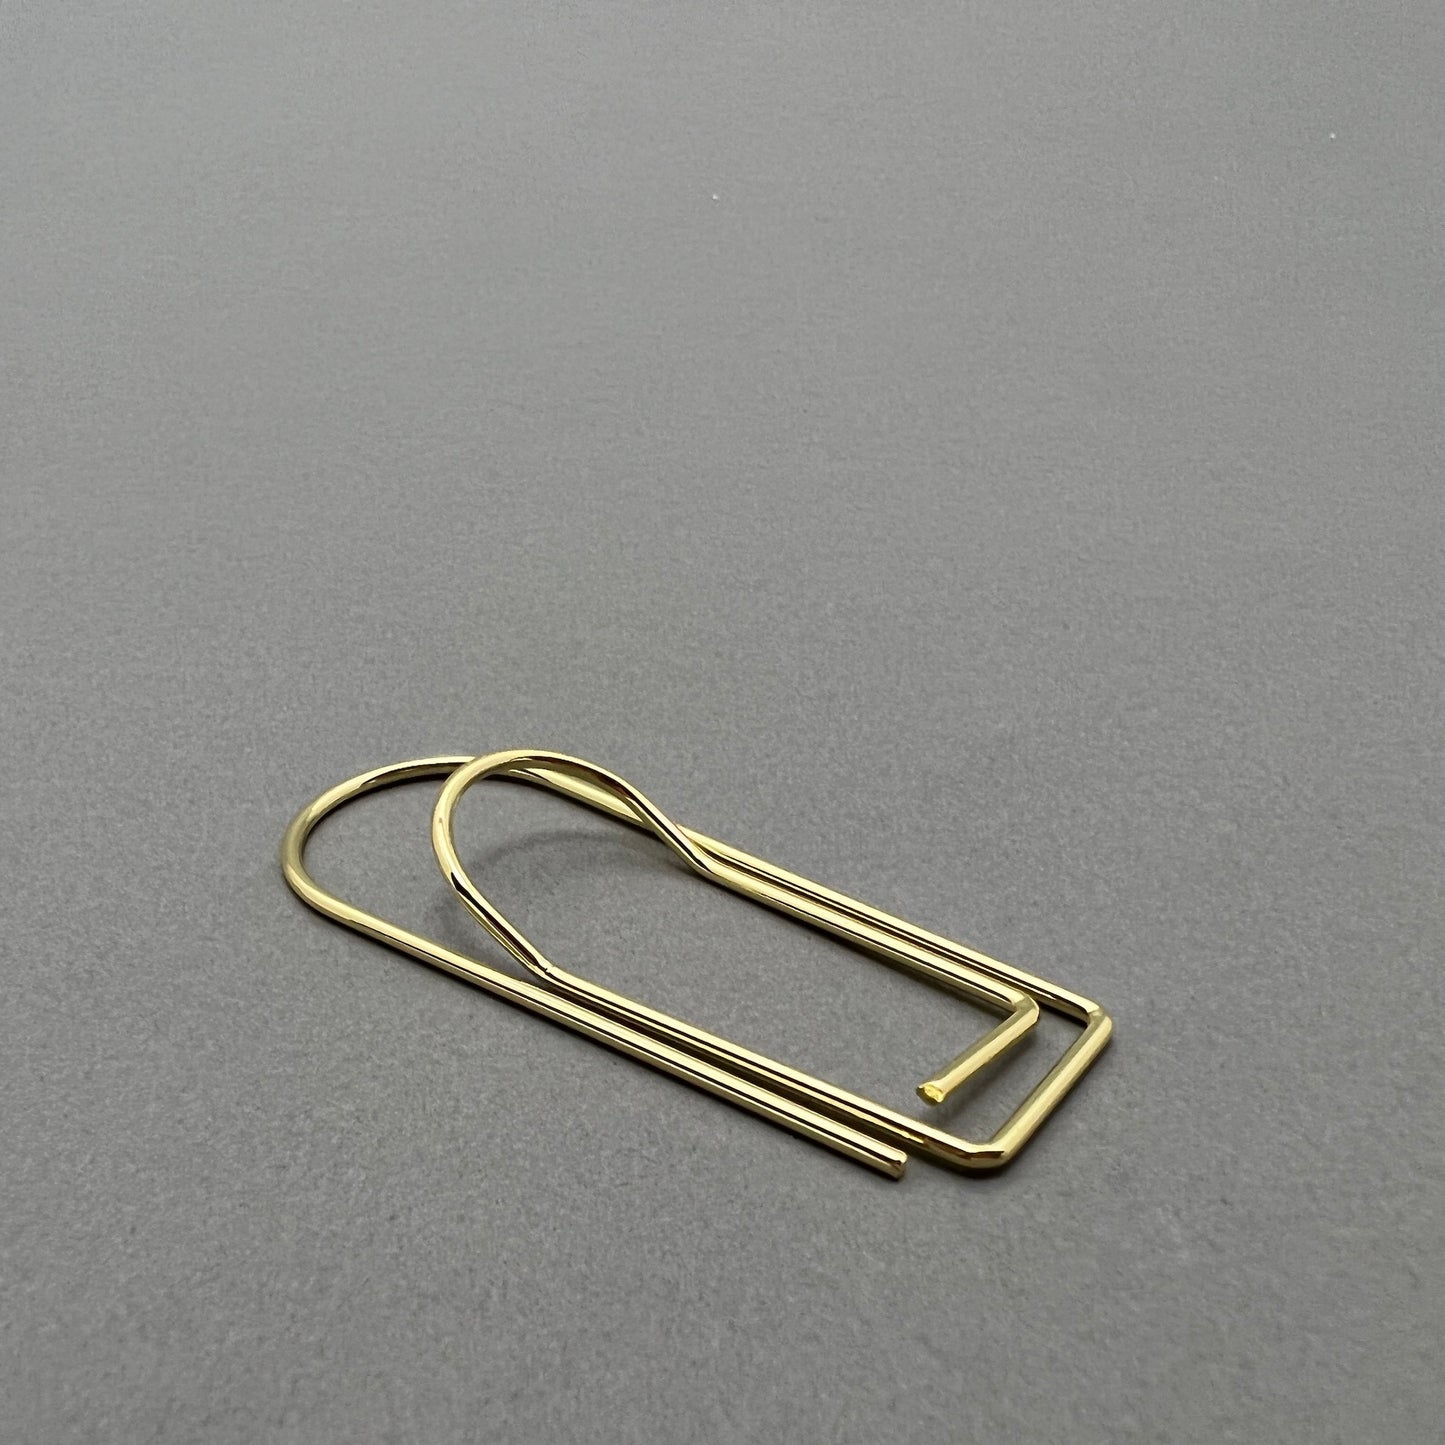 A gold colored iron paper clip laying on a gray background